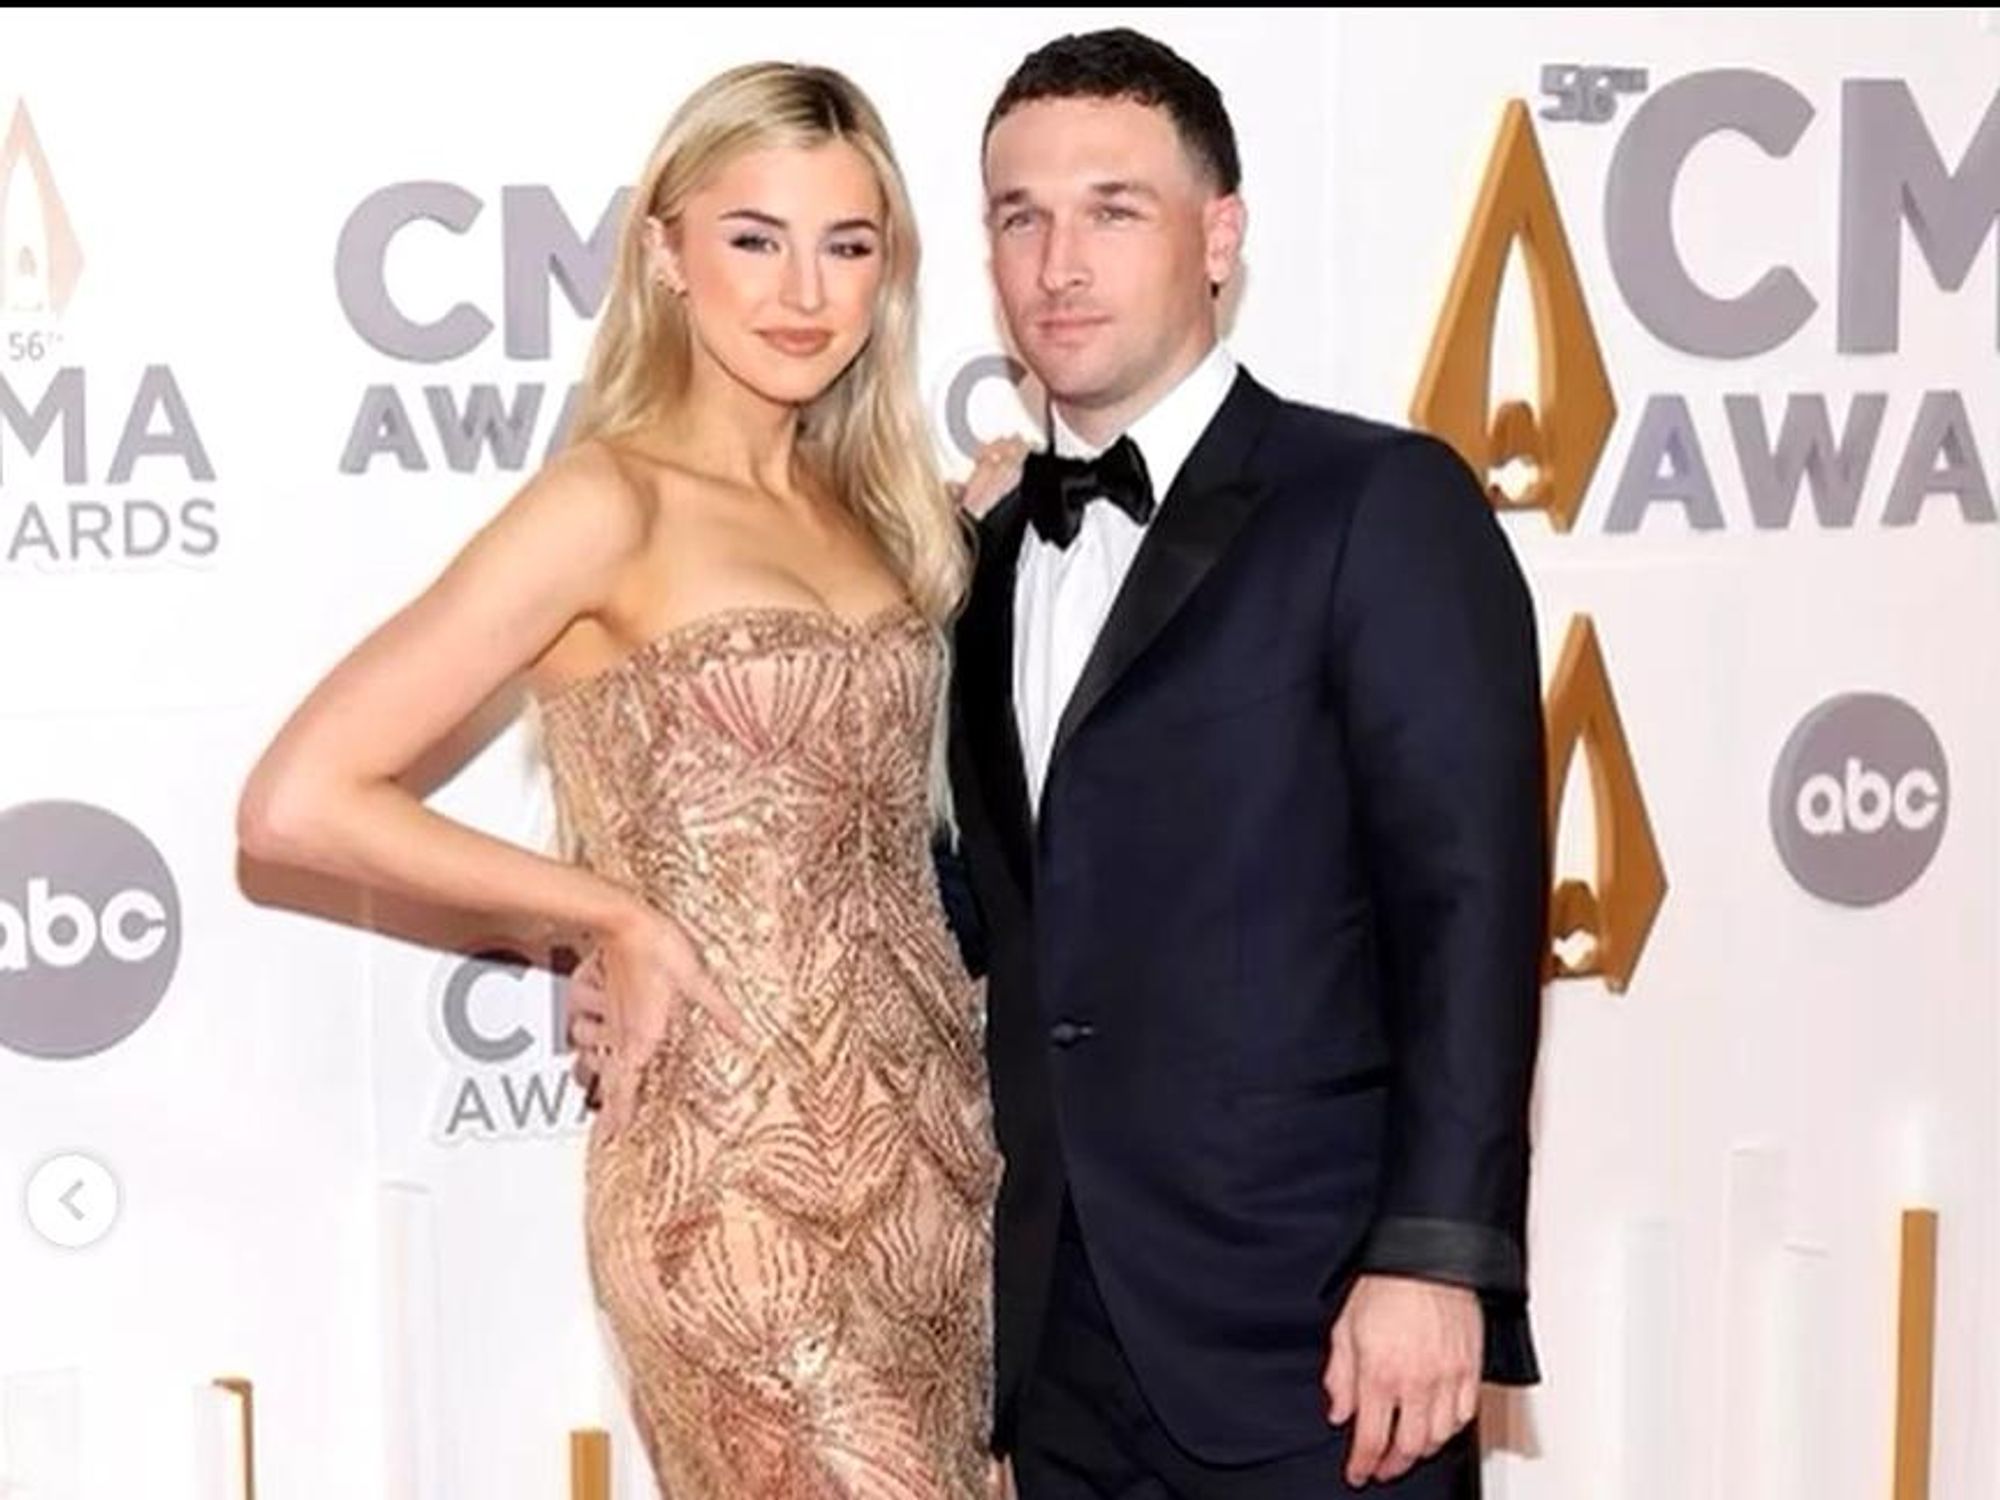 Alex Bregman rocks the red carpet with wife Reagan and returns to meet  hundreds of Houston fans - CultureMap Houston